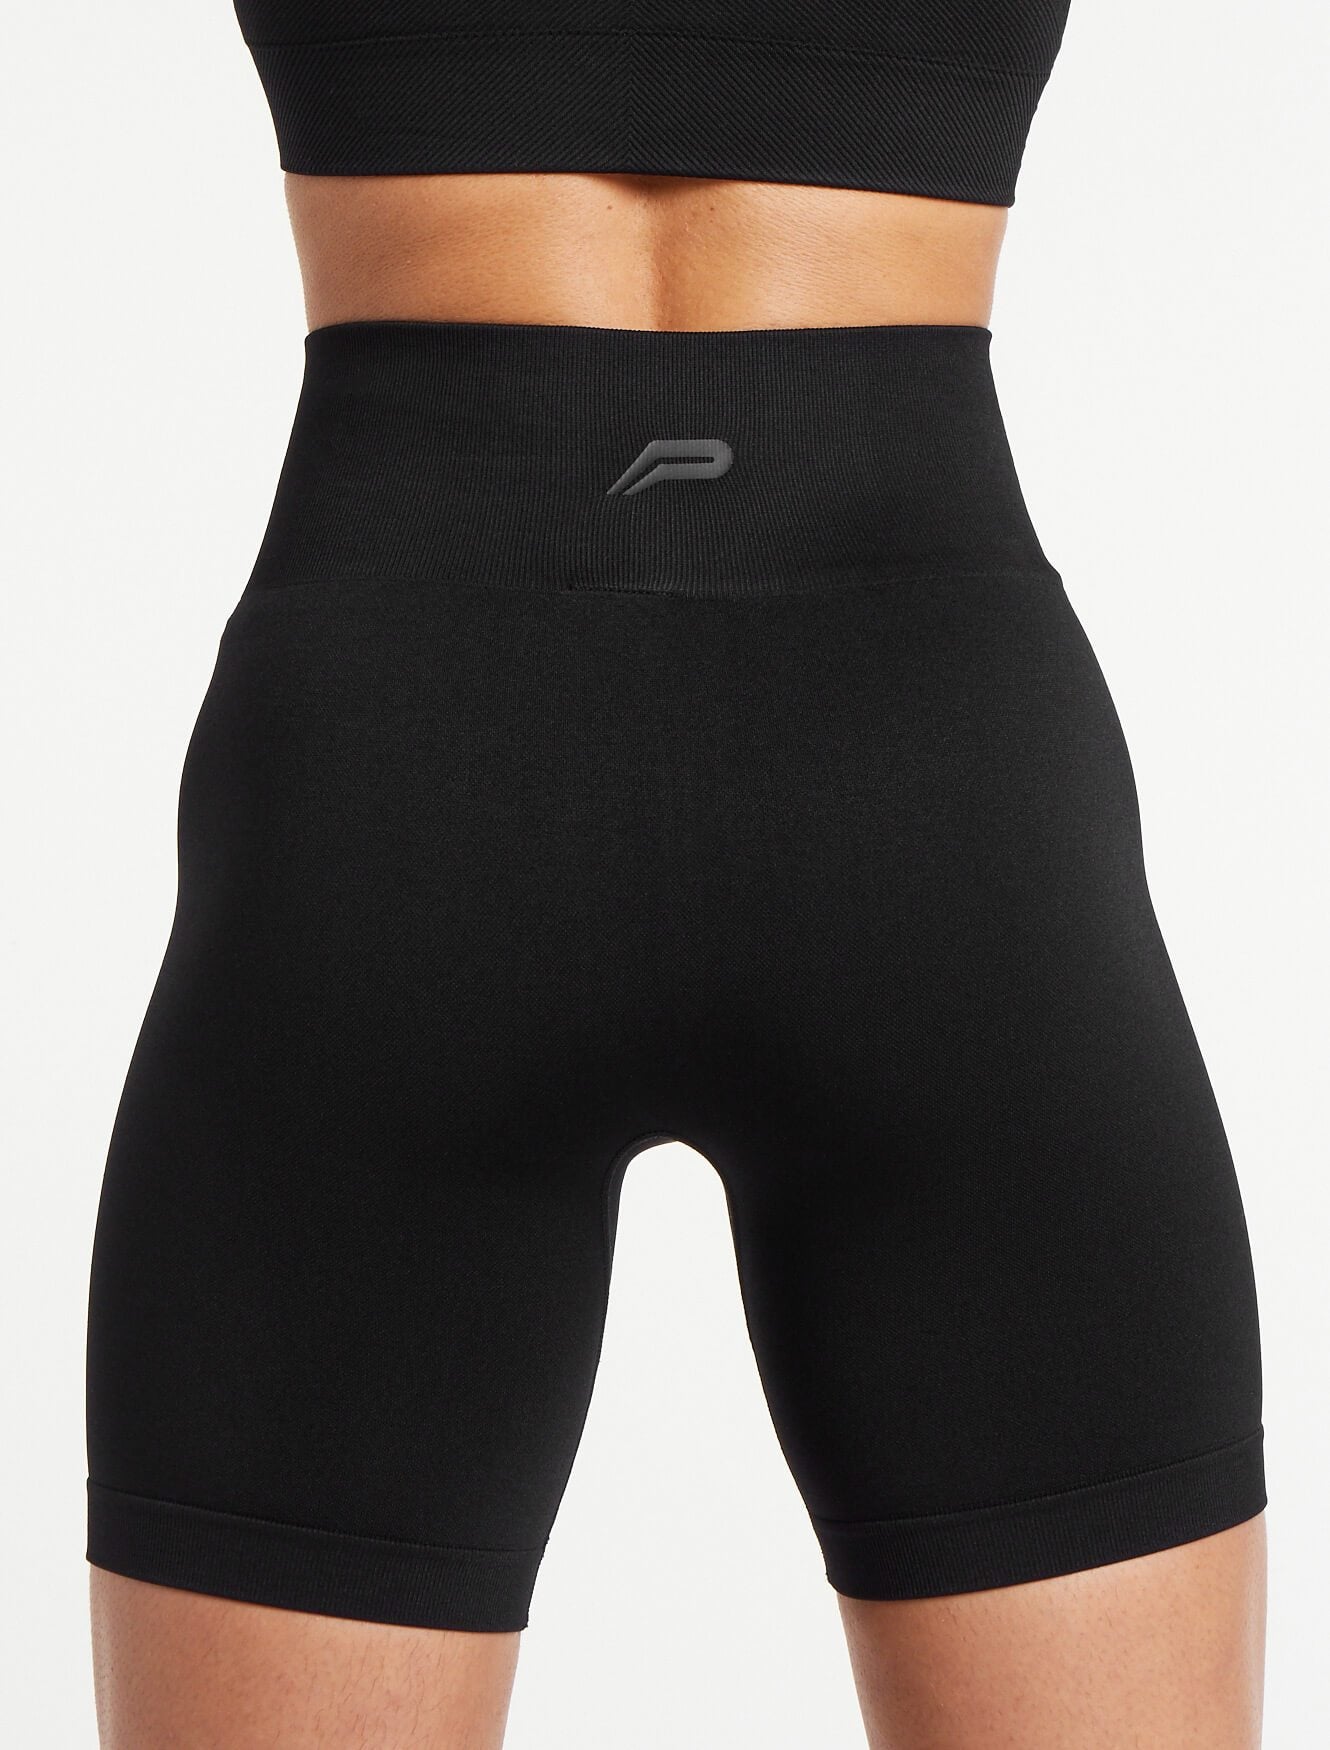 Afterglow Seamless Shorts / Blackout Pursue Fitness 6